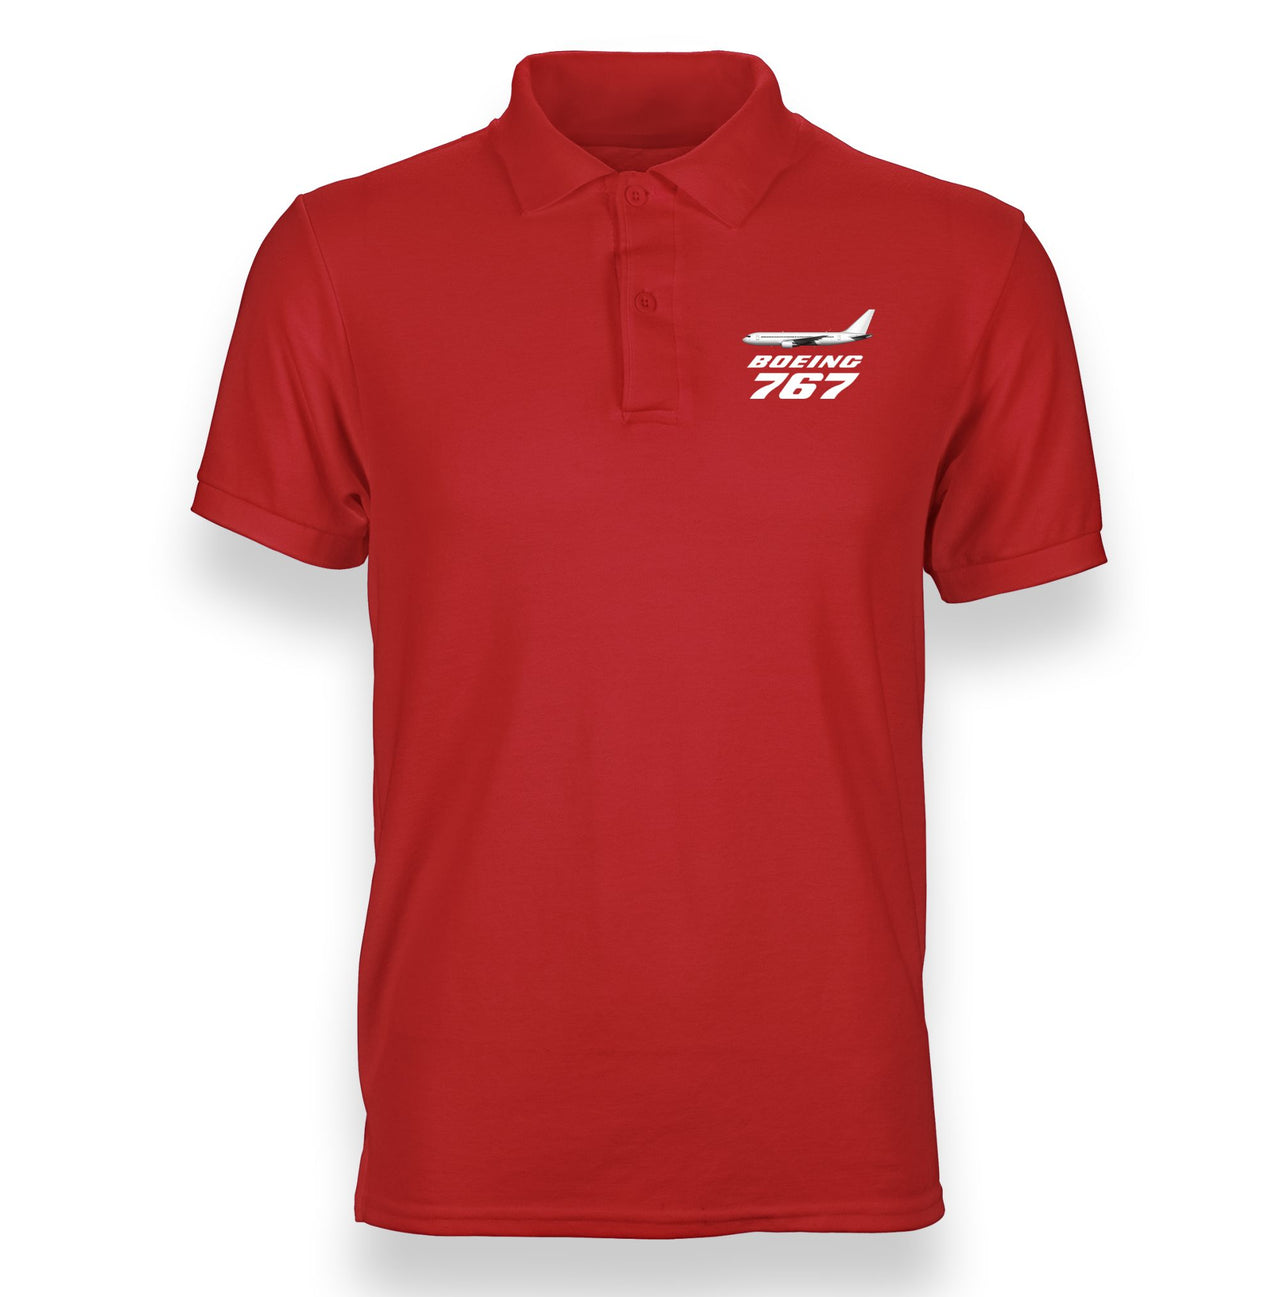 The Boeing 767 Designed "WOMEN" Polo T-Shirts